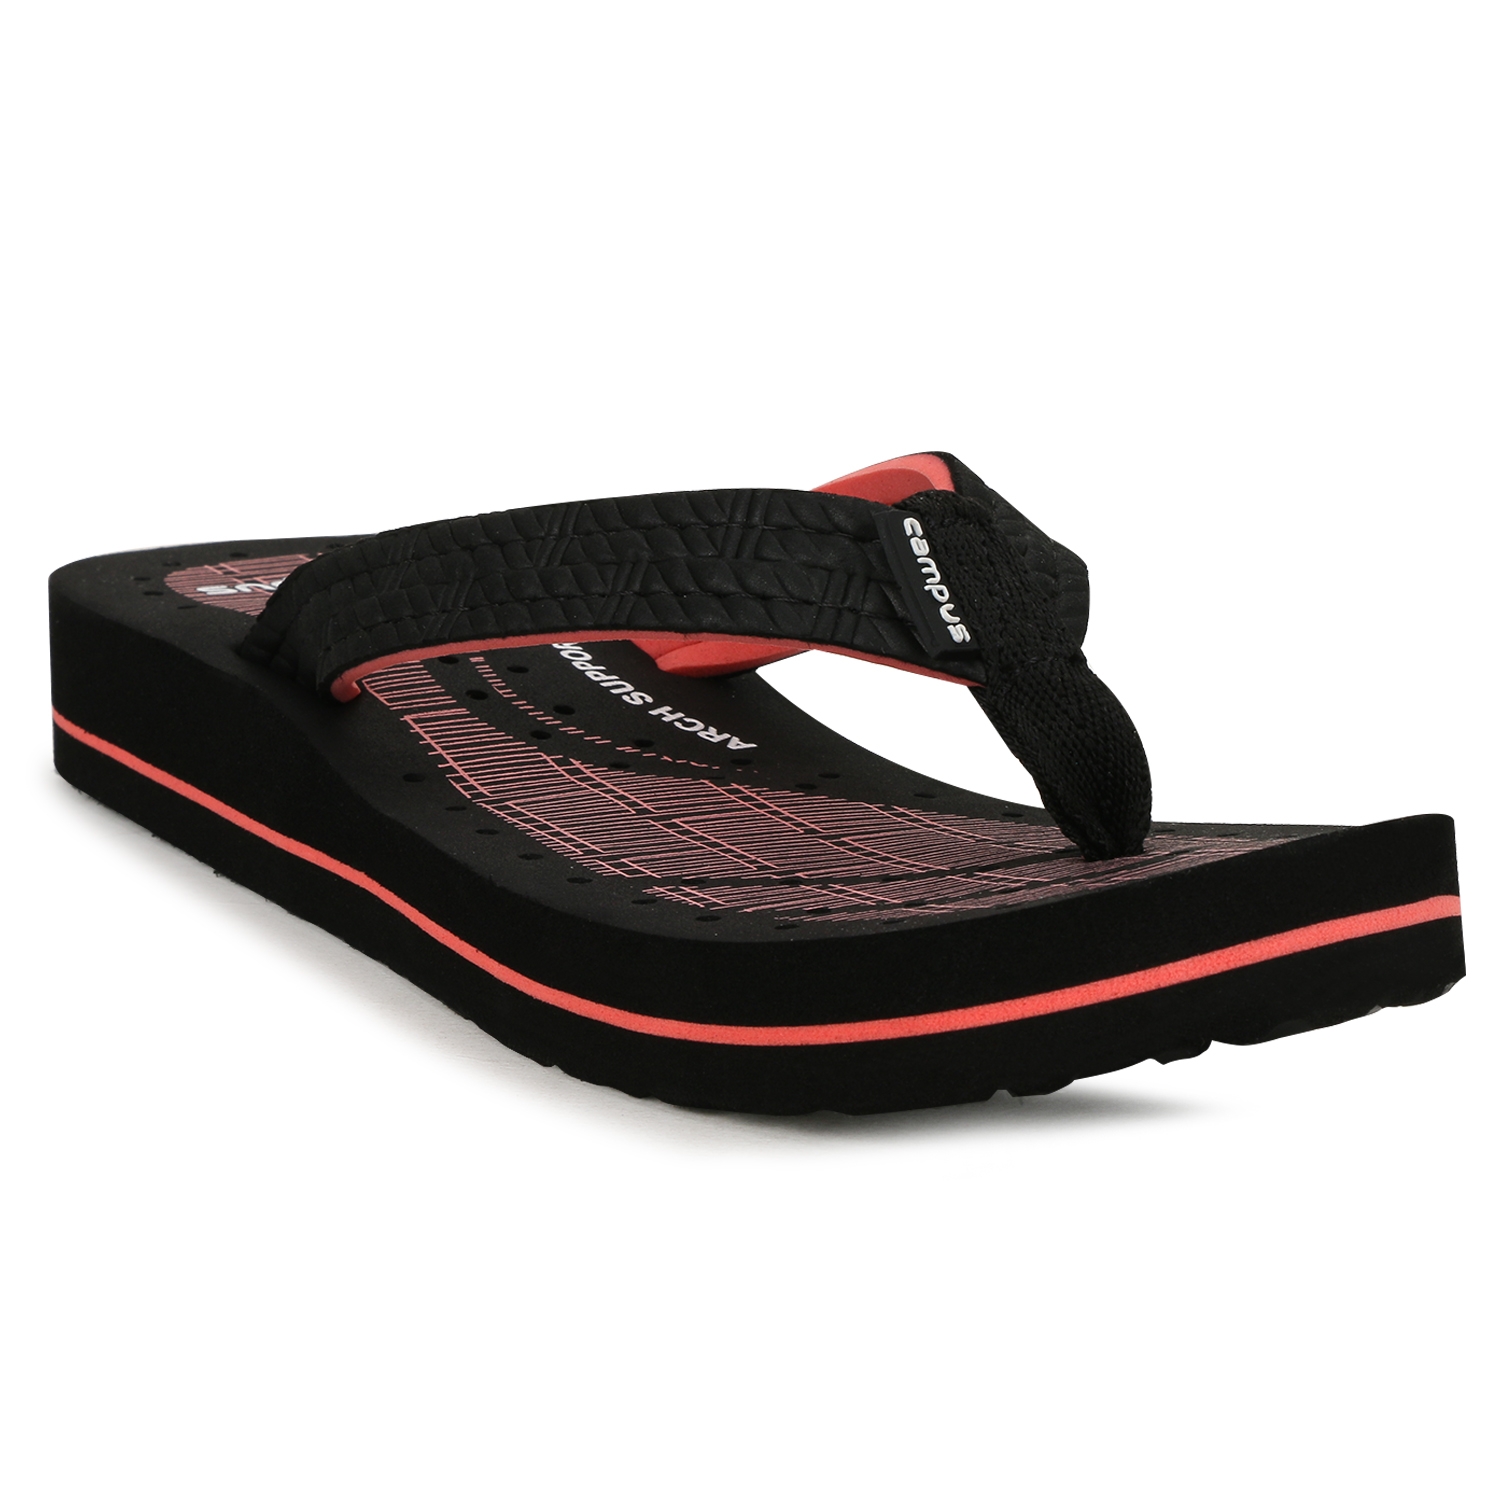 Campus Shoes | Black Slippers